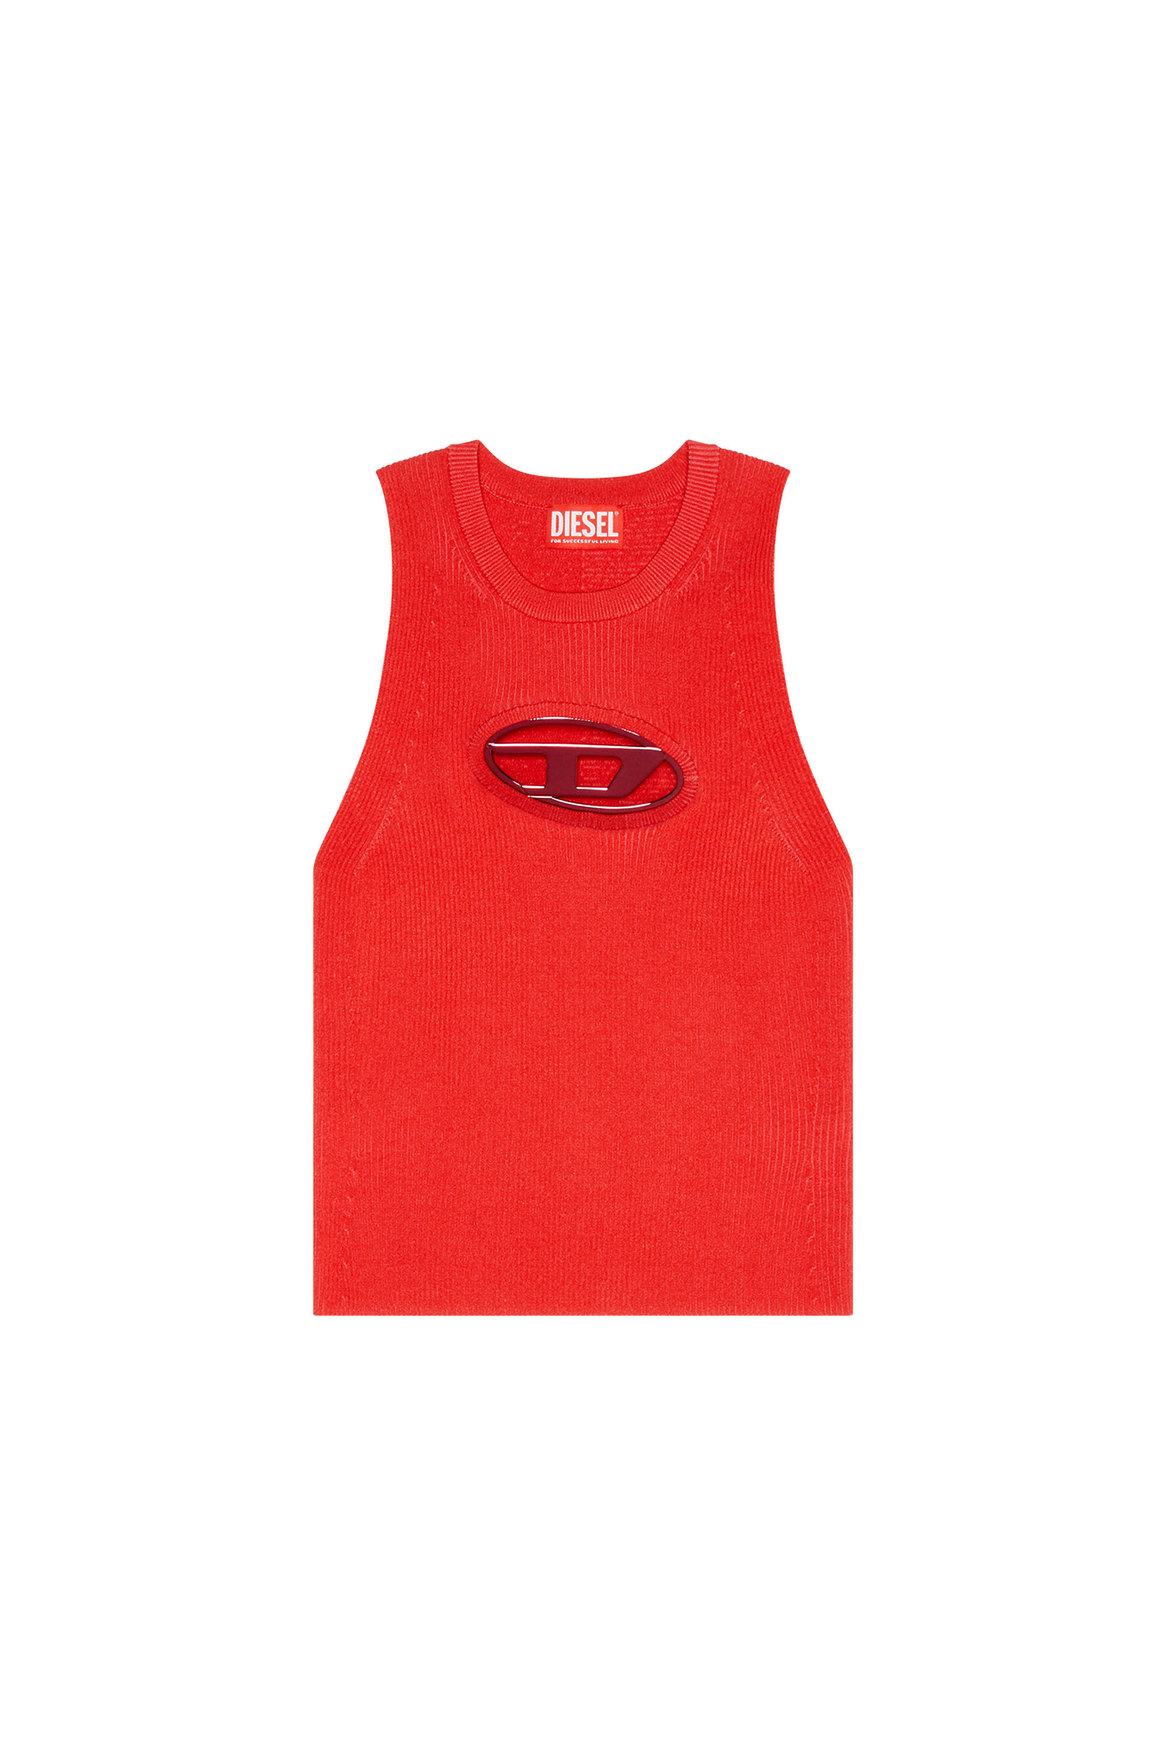 Cut-out knit top with logo plaque | Diesel